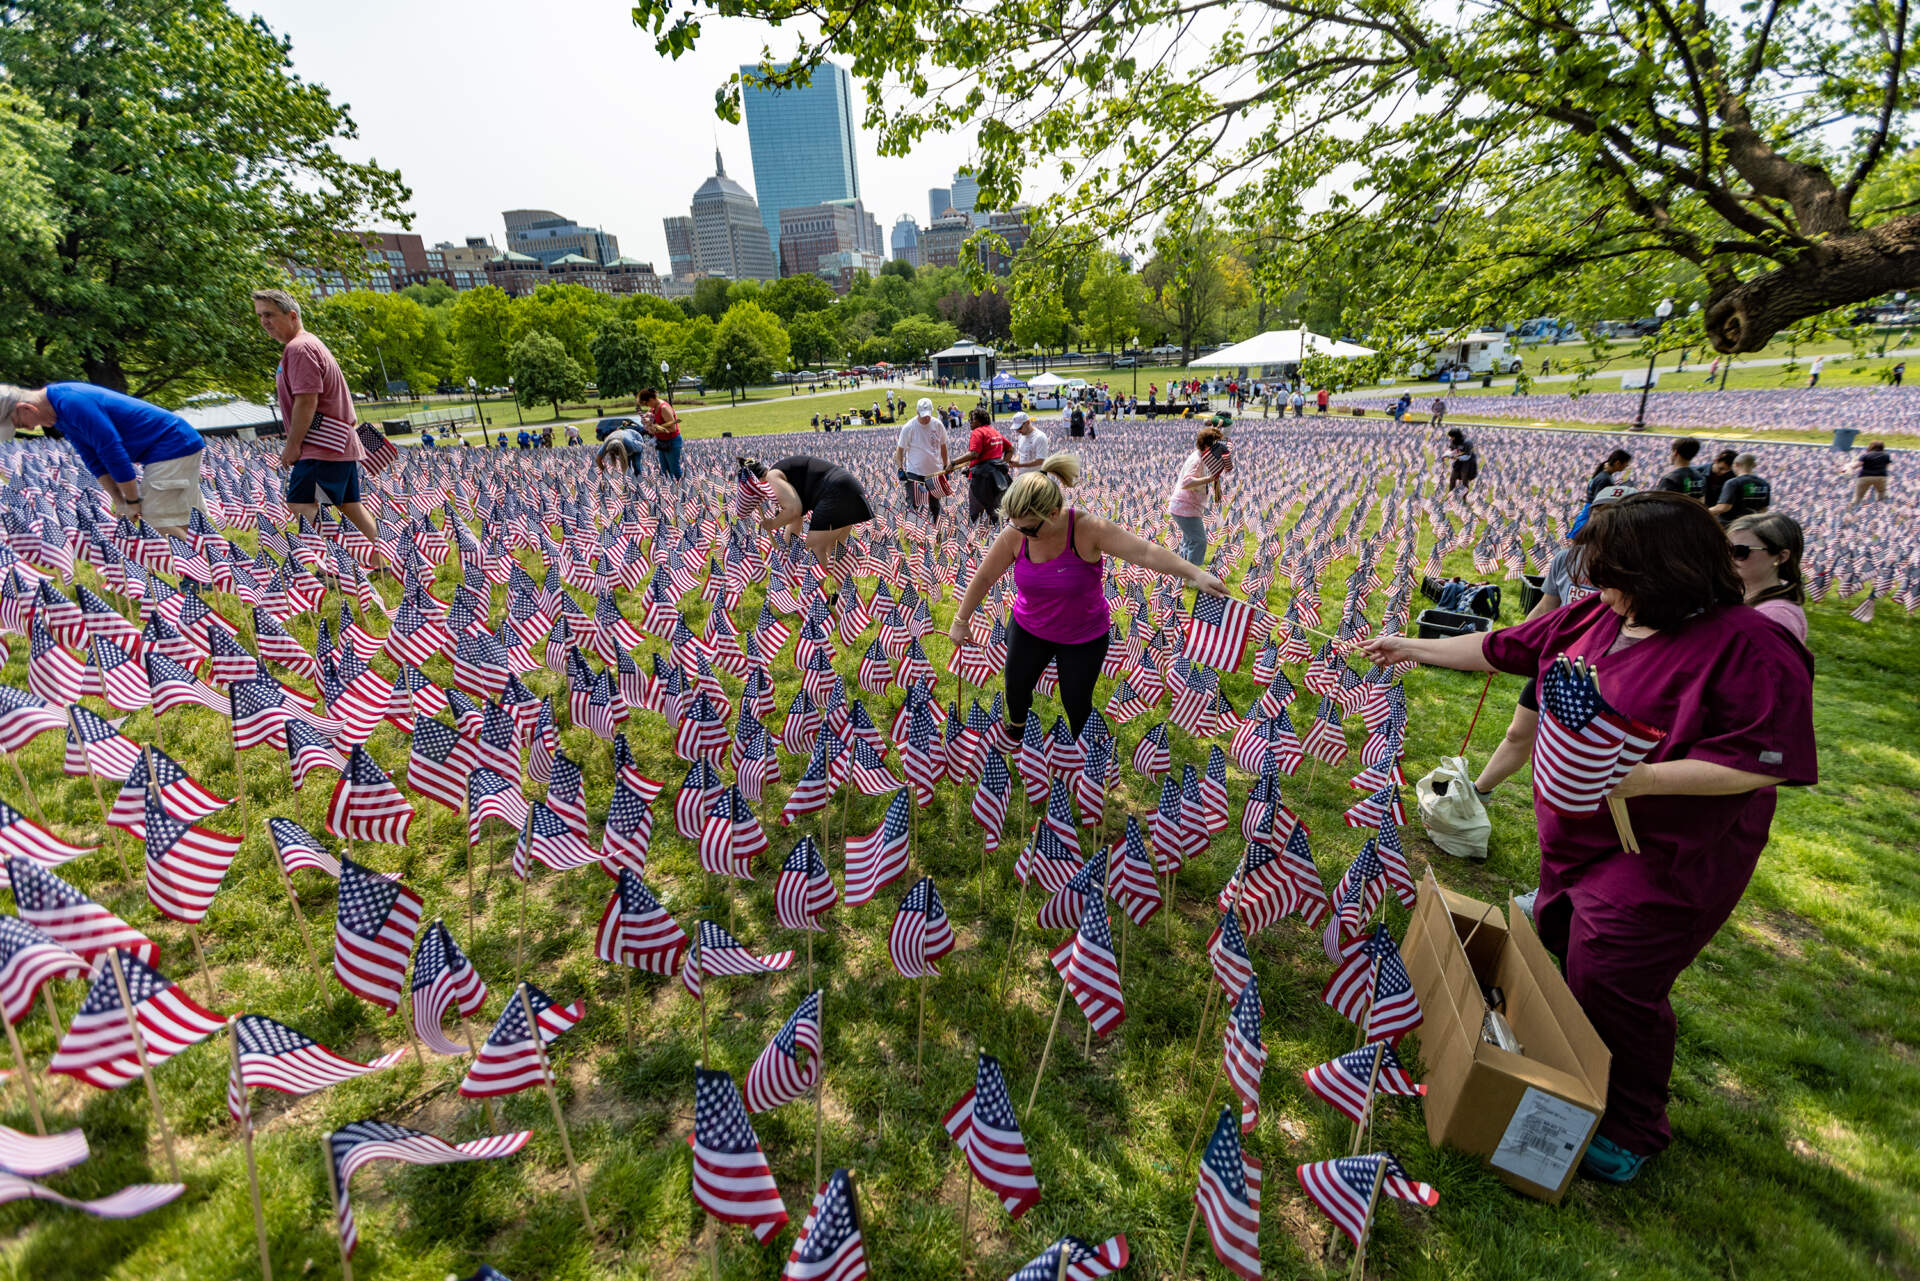 Volunteers plant American flags into the ground of the Boston Common for the upcoming Memorial Day weekend. (Jesse Costa/WBUR)